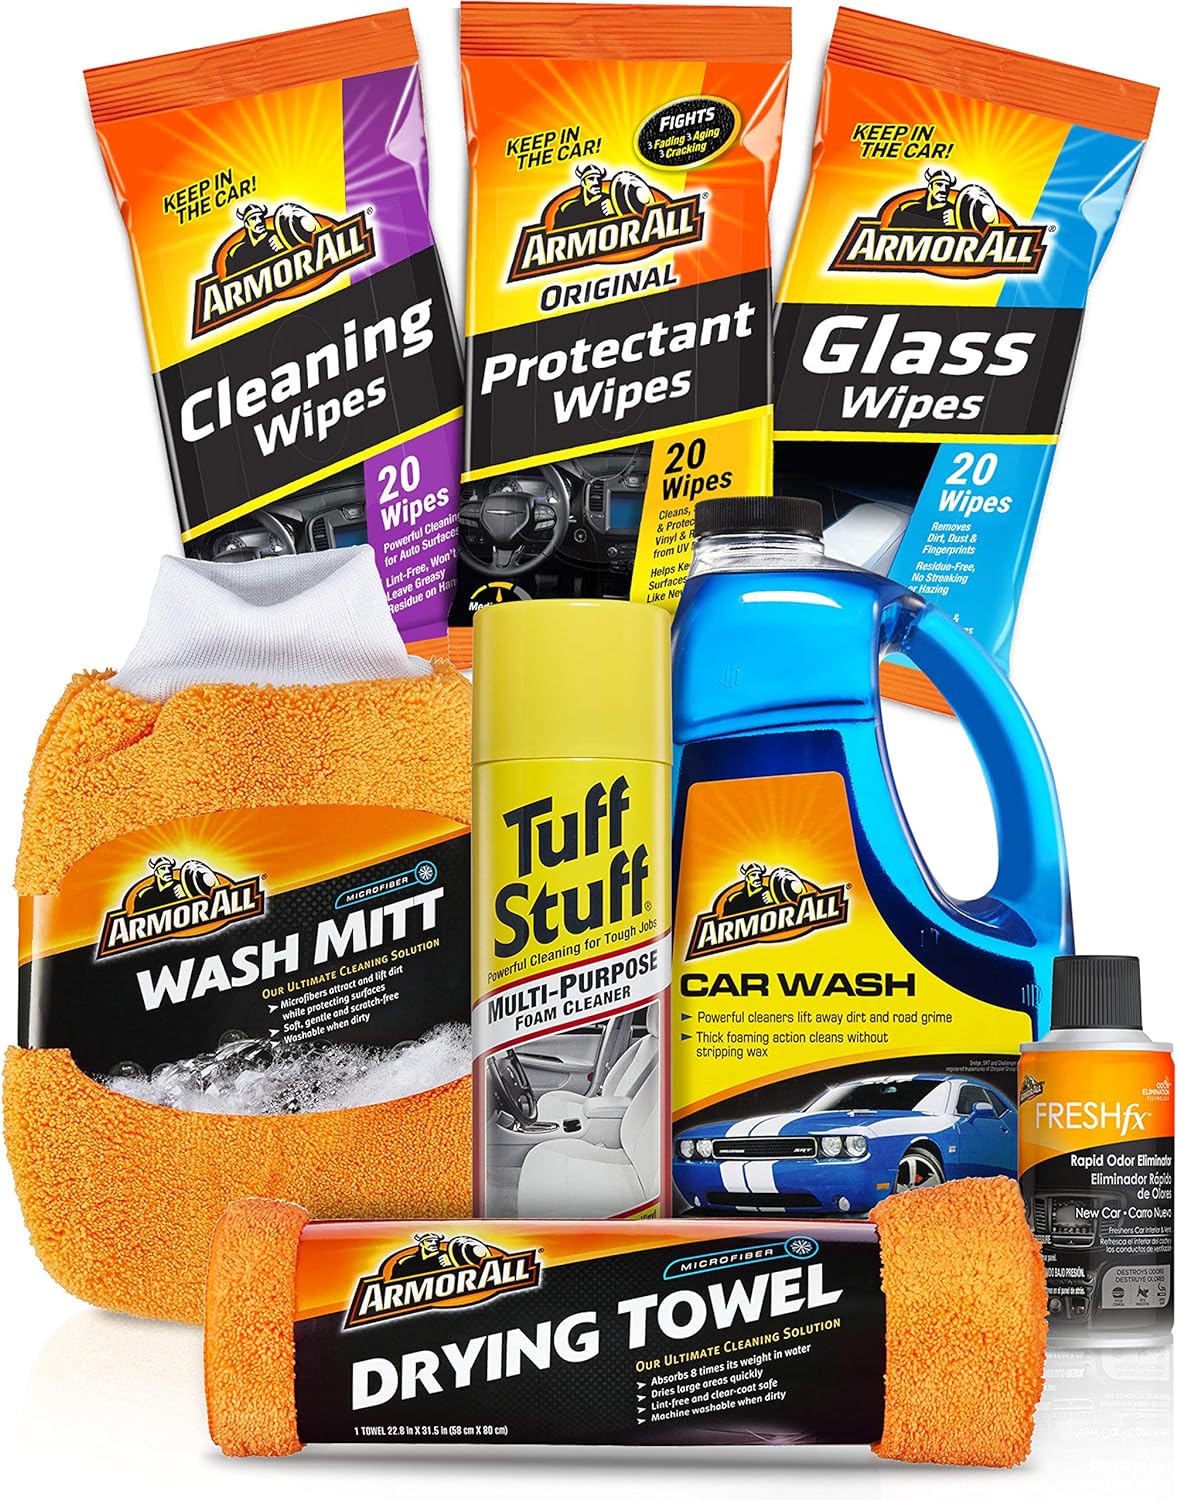 Armor All Car Wash and Cleaner Kit (8 Items) - Includes Interior